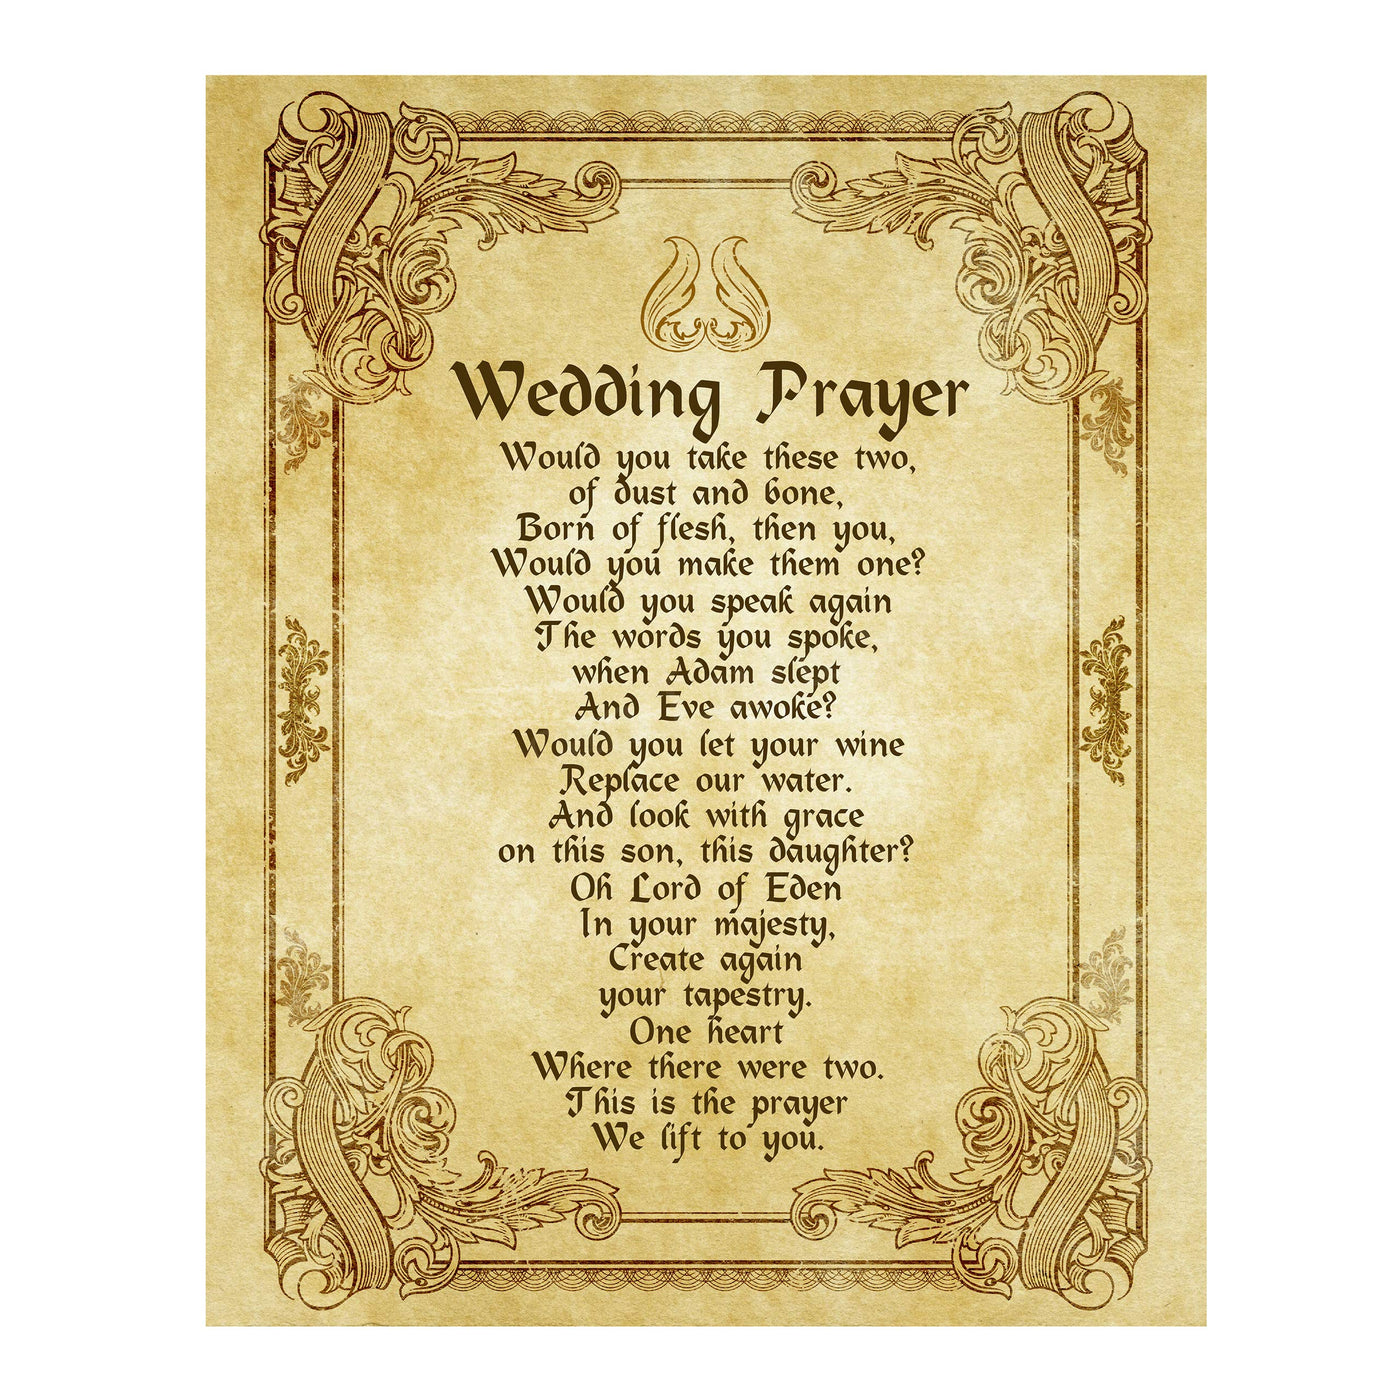 Wedding Prayer-Vintage-Poetic Wall Art -11 x 14" Love and Marriage Poem Print w/Distressed Parchment Design -Ready to Frame. Perfect for Spouse-Newlywed-Life Partners. Great Gift for New Couples!